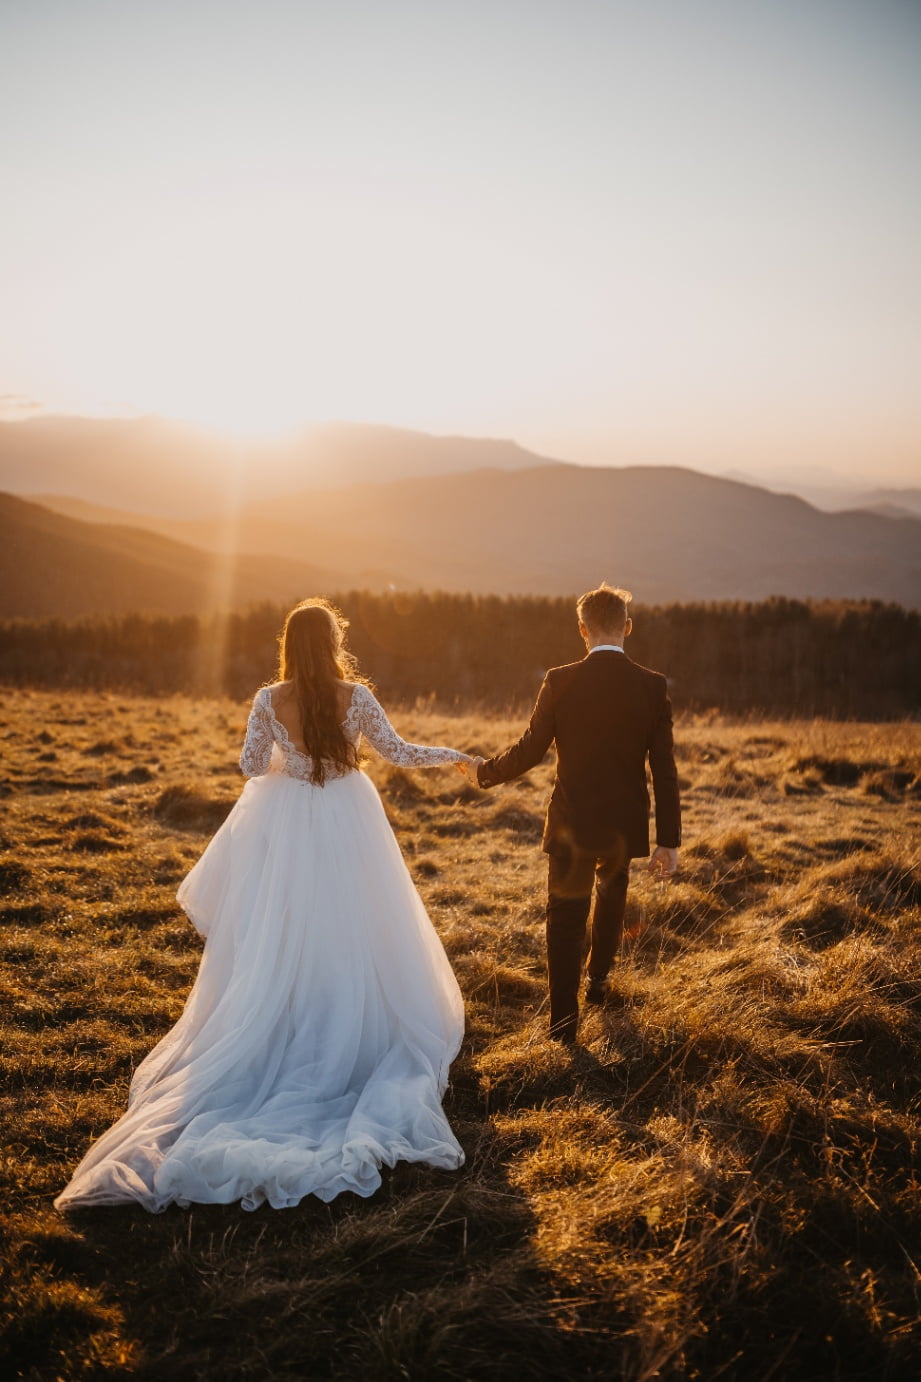 A bride and groom walking through grass towards the sunset.